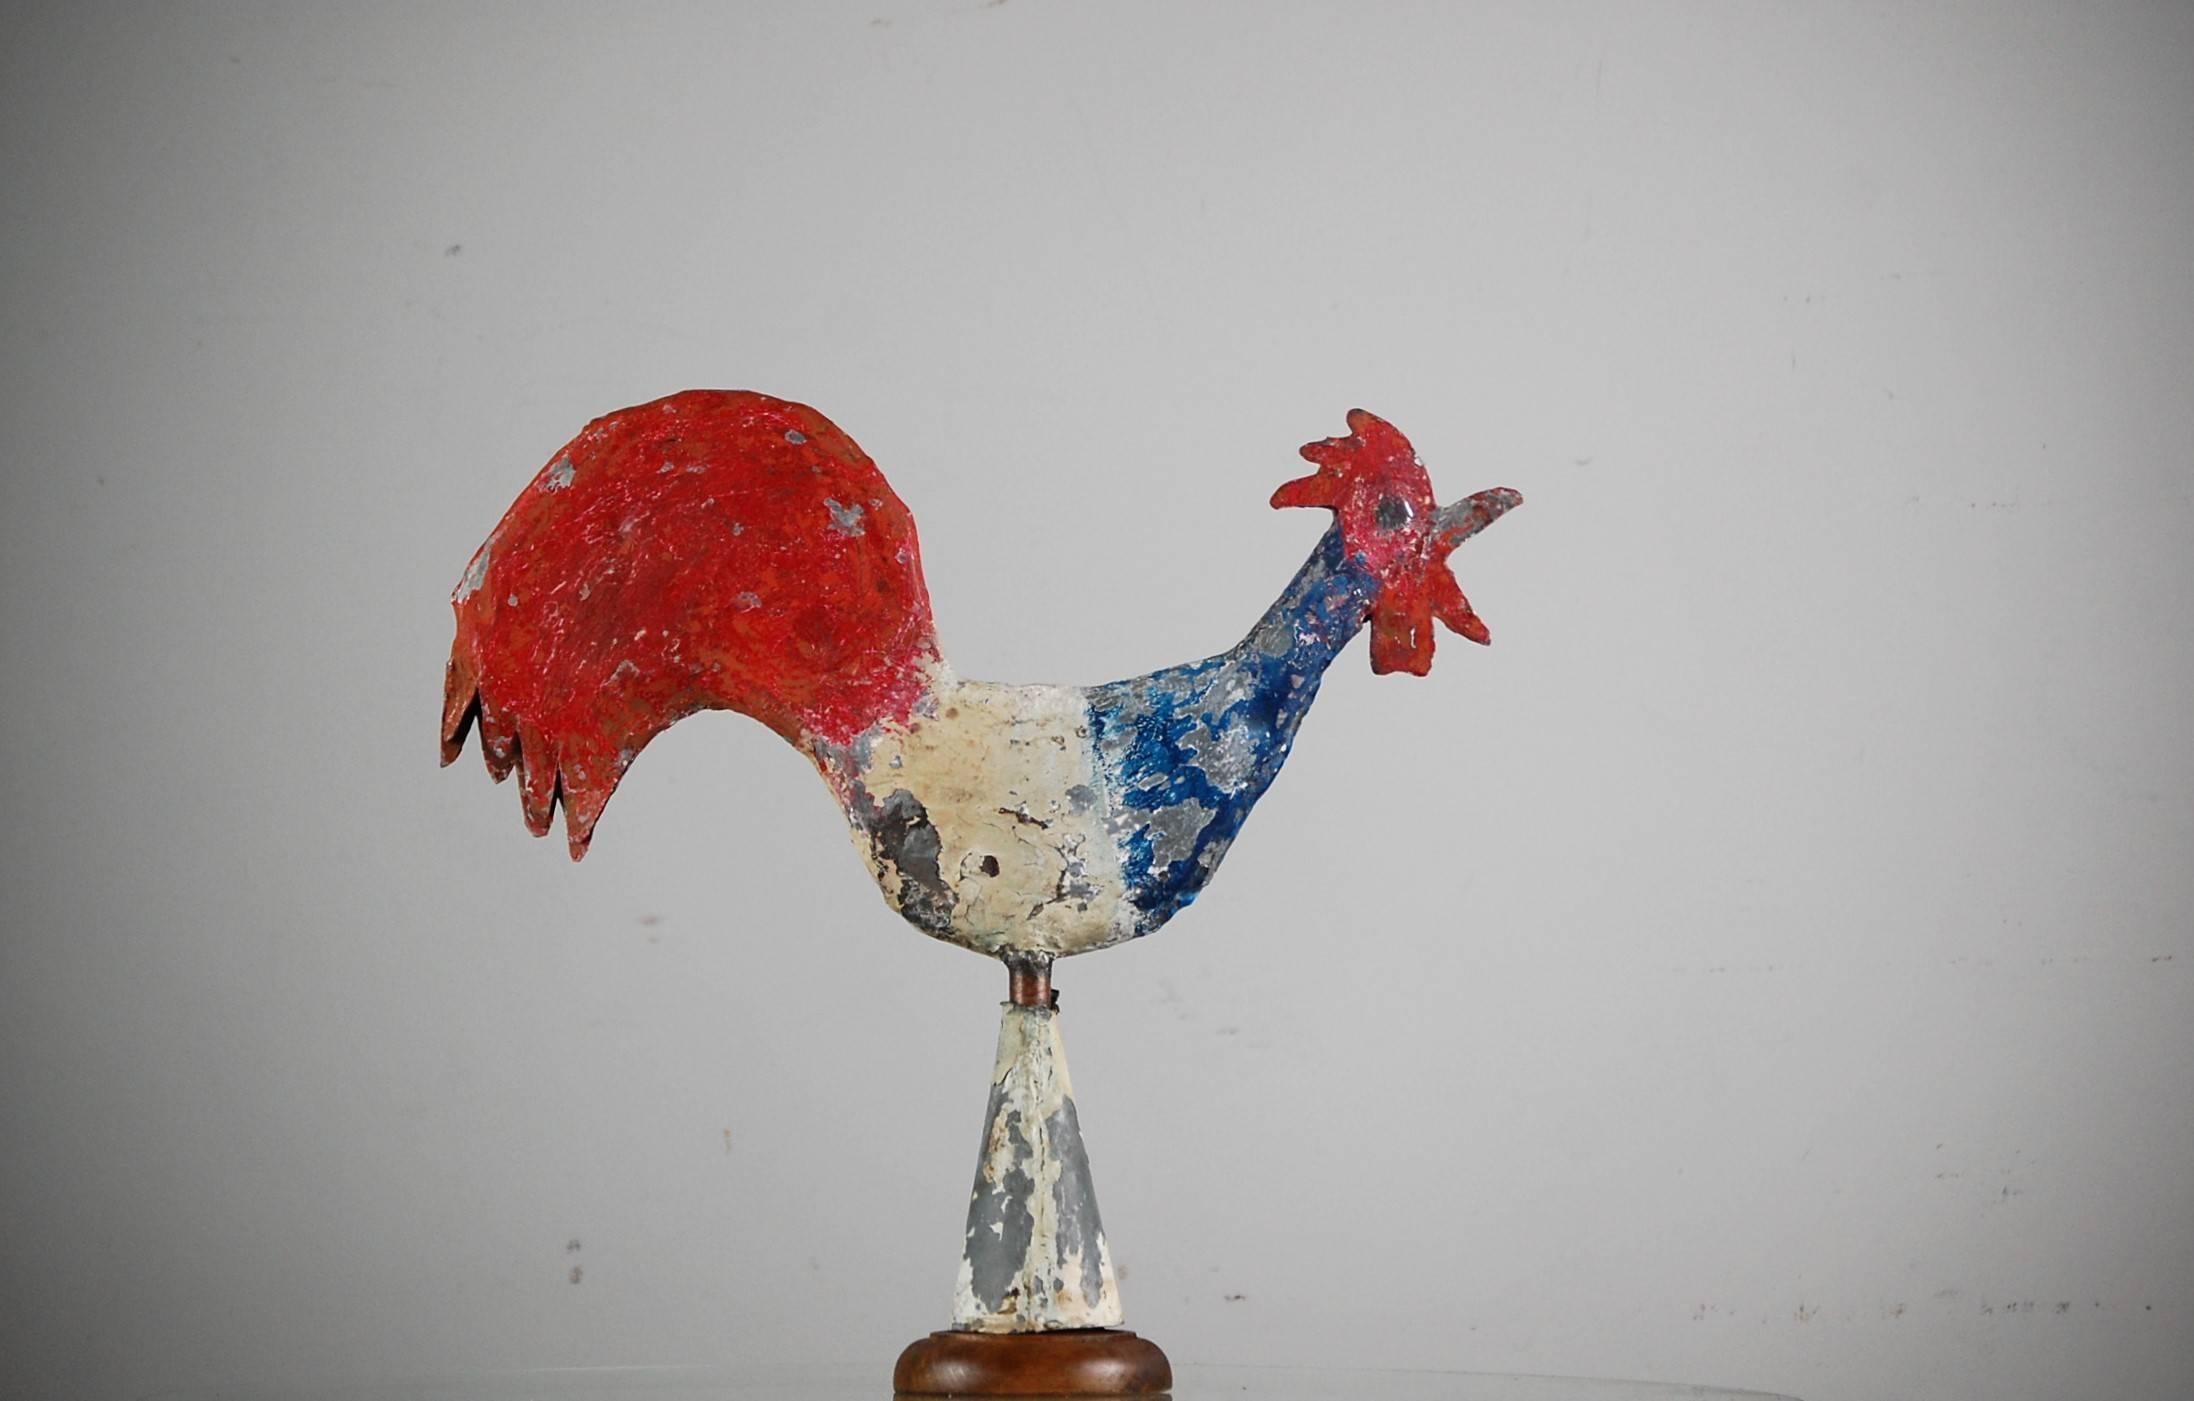 Early 20th century diminutive full bodied zinc cockerel weathervane. Naïve construction and charming distressed paint, the patriotic color of the tricolor or French flag were often daubed on the cockerels (French national symbol) for patriotic